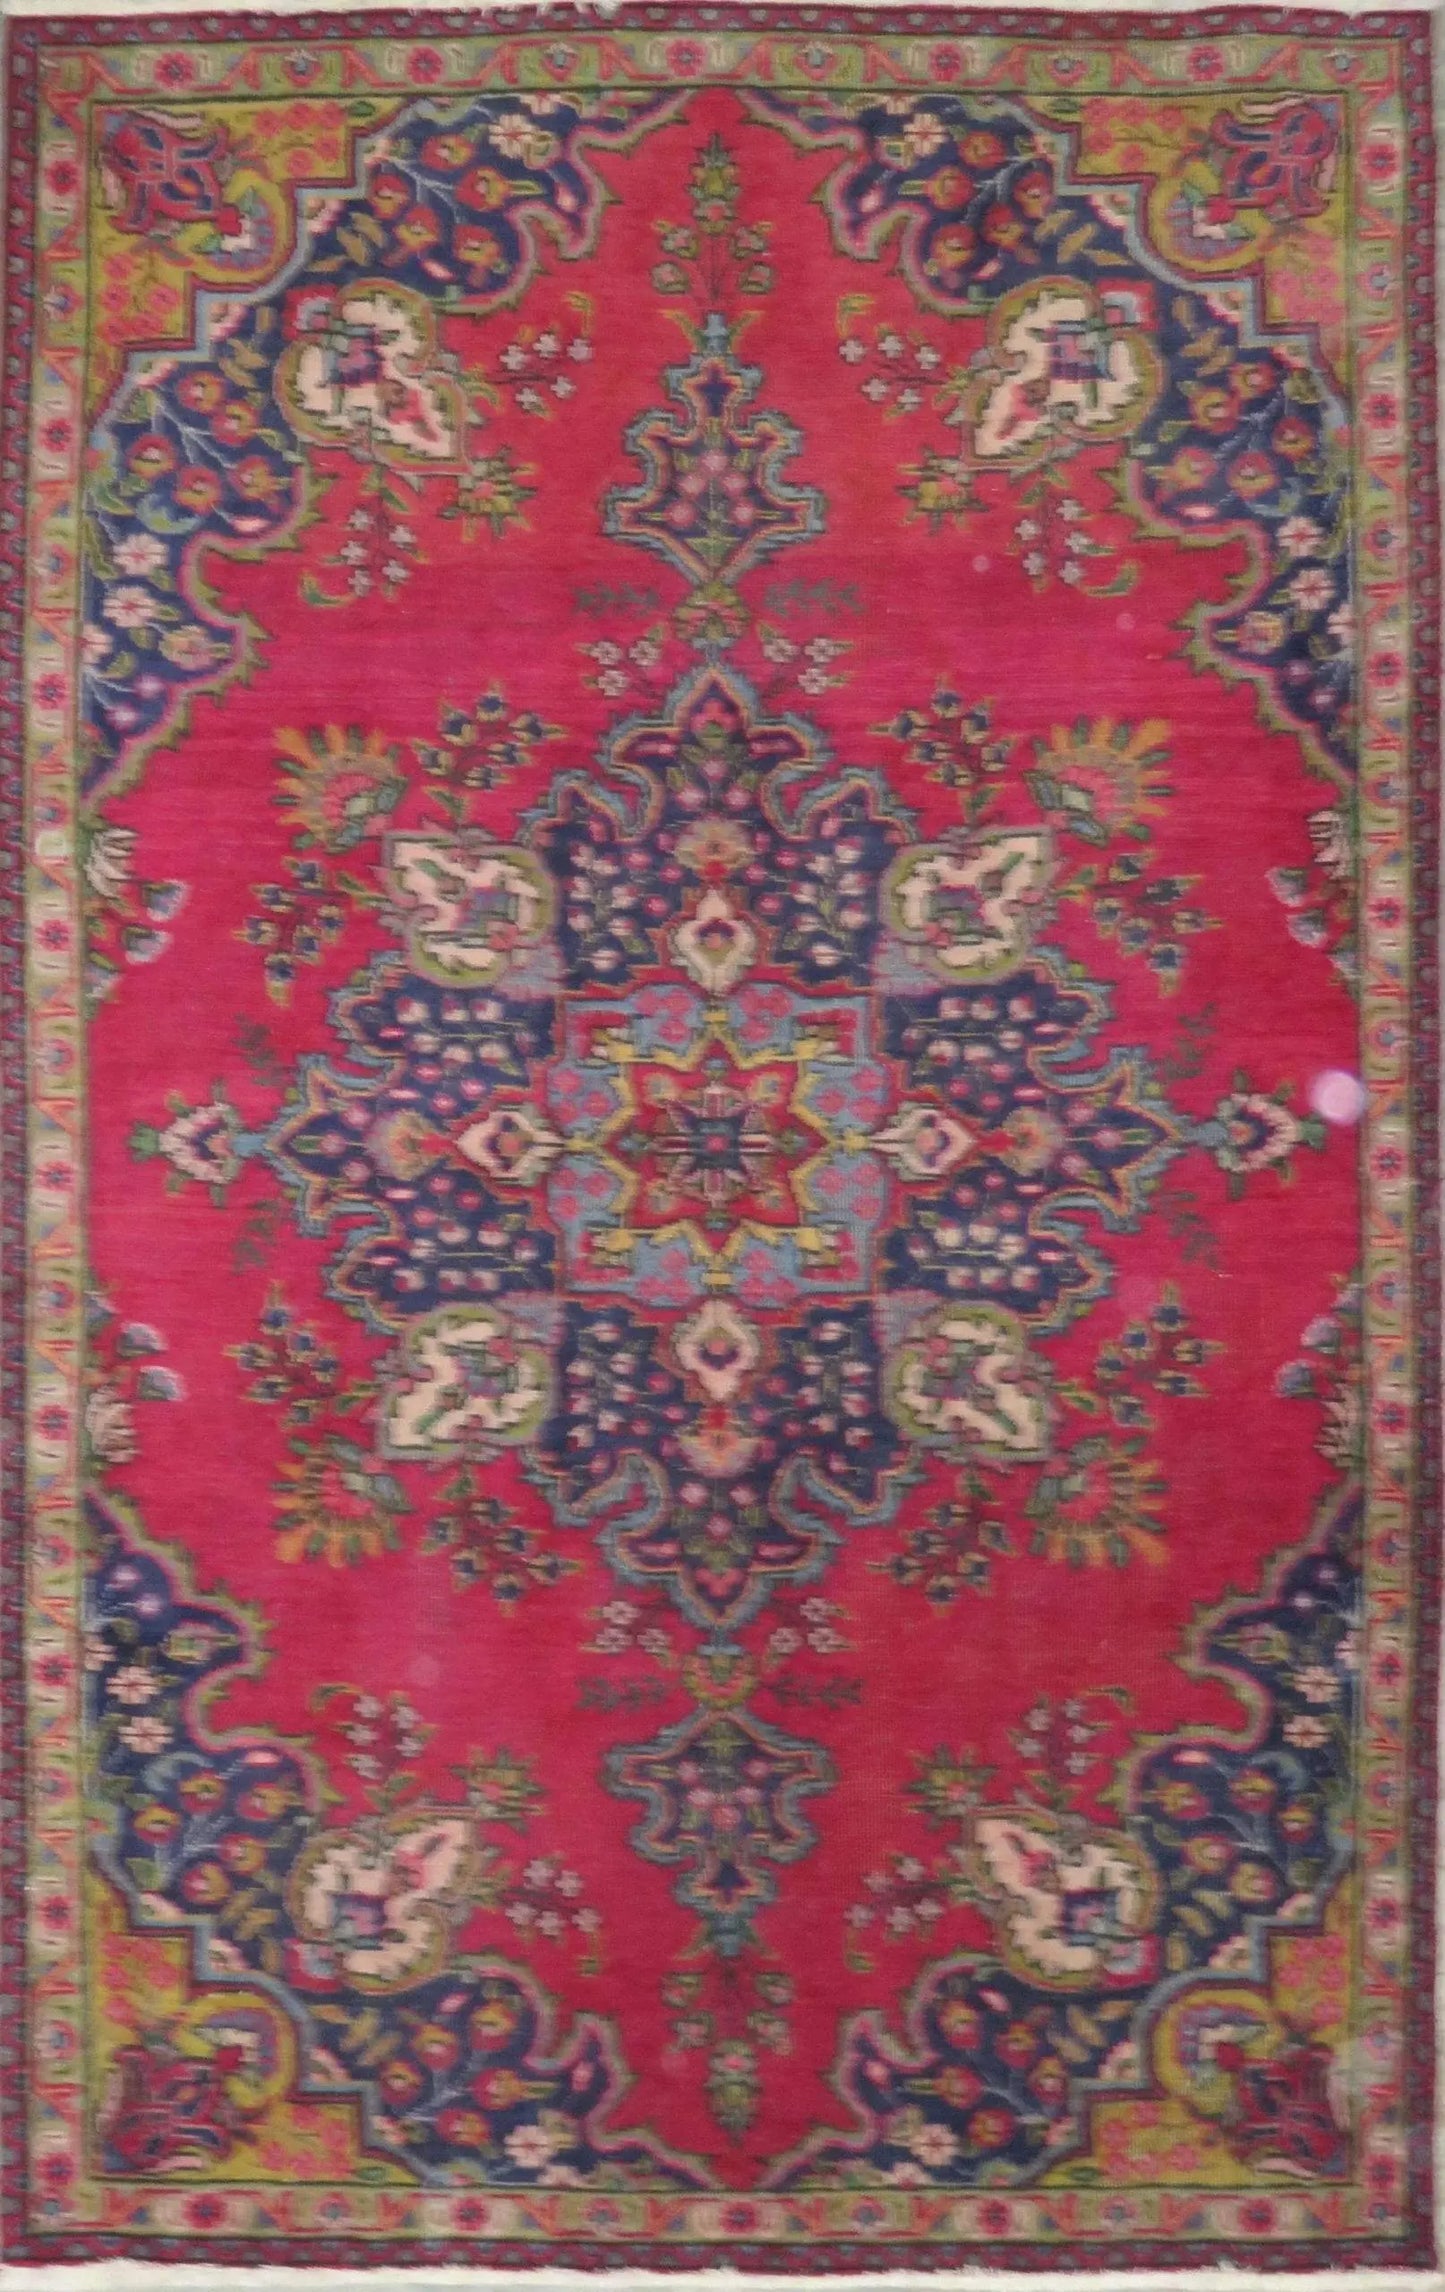 Hand-Knotted Vintage Rug 7'5" x 4'8"